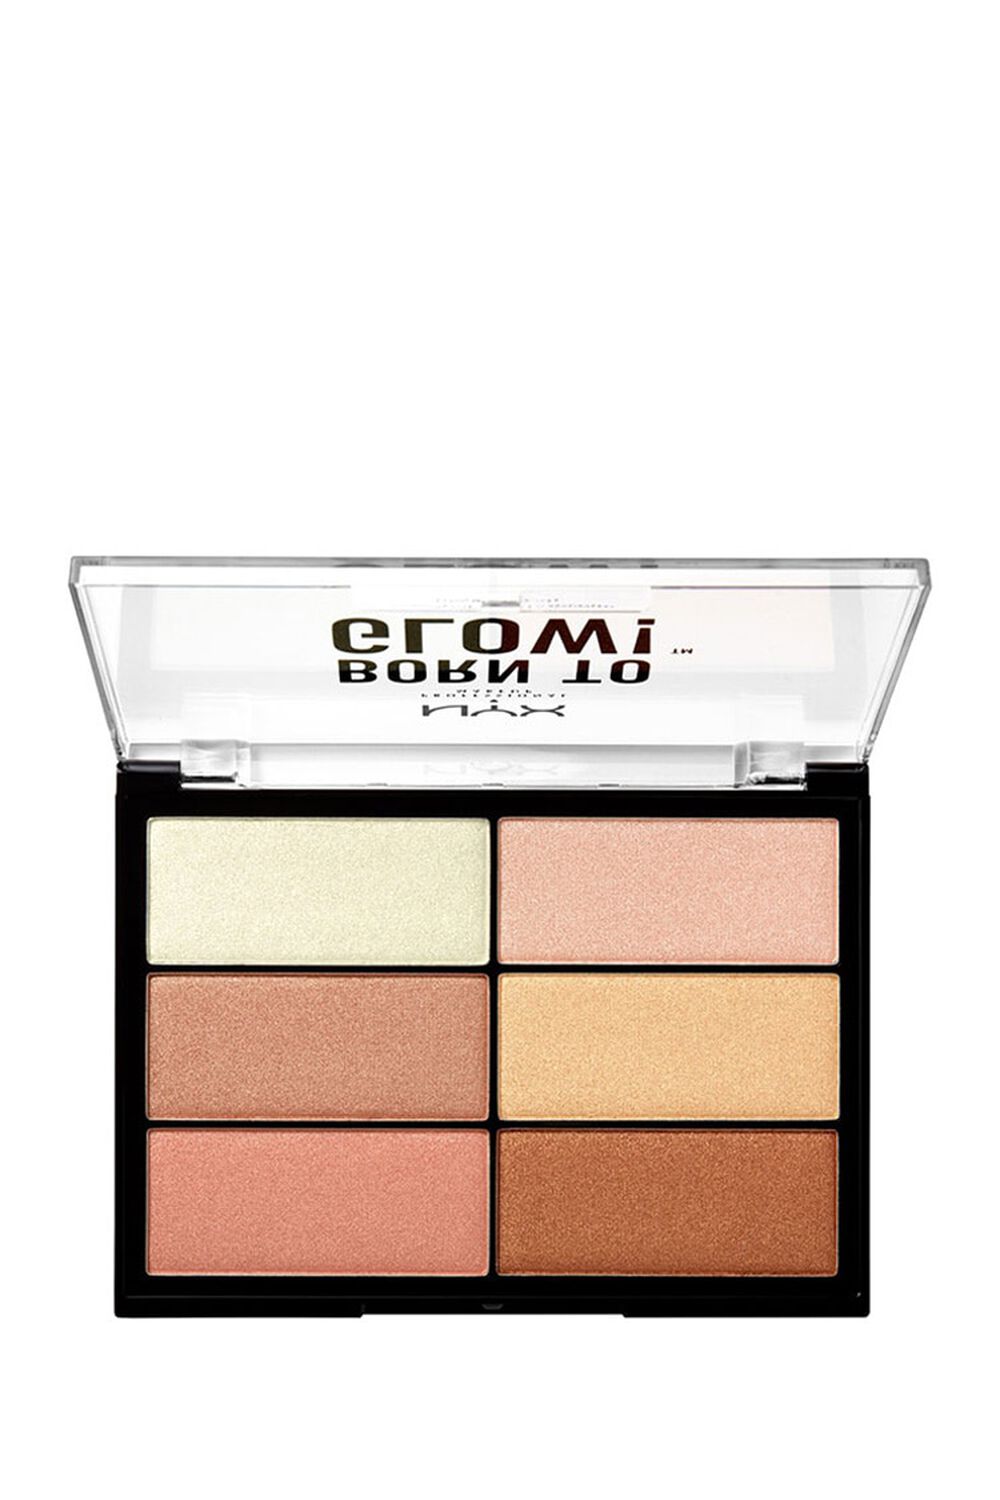 Born to Glow Highlighting Palette, image 1